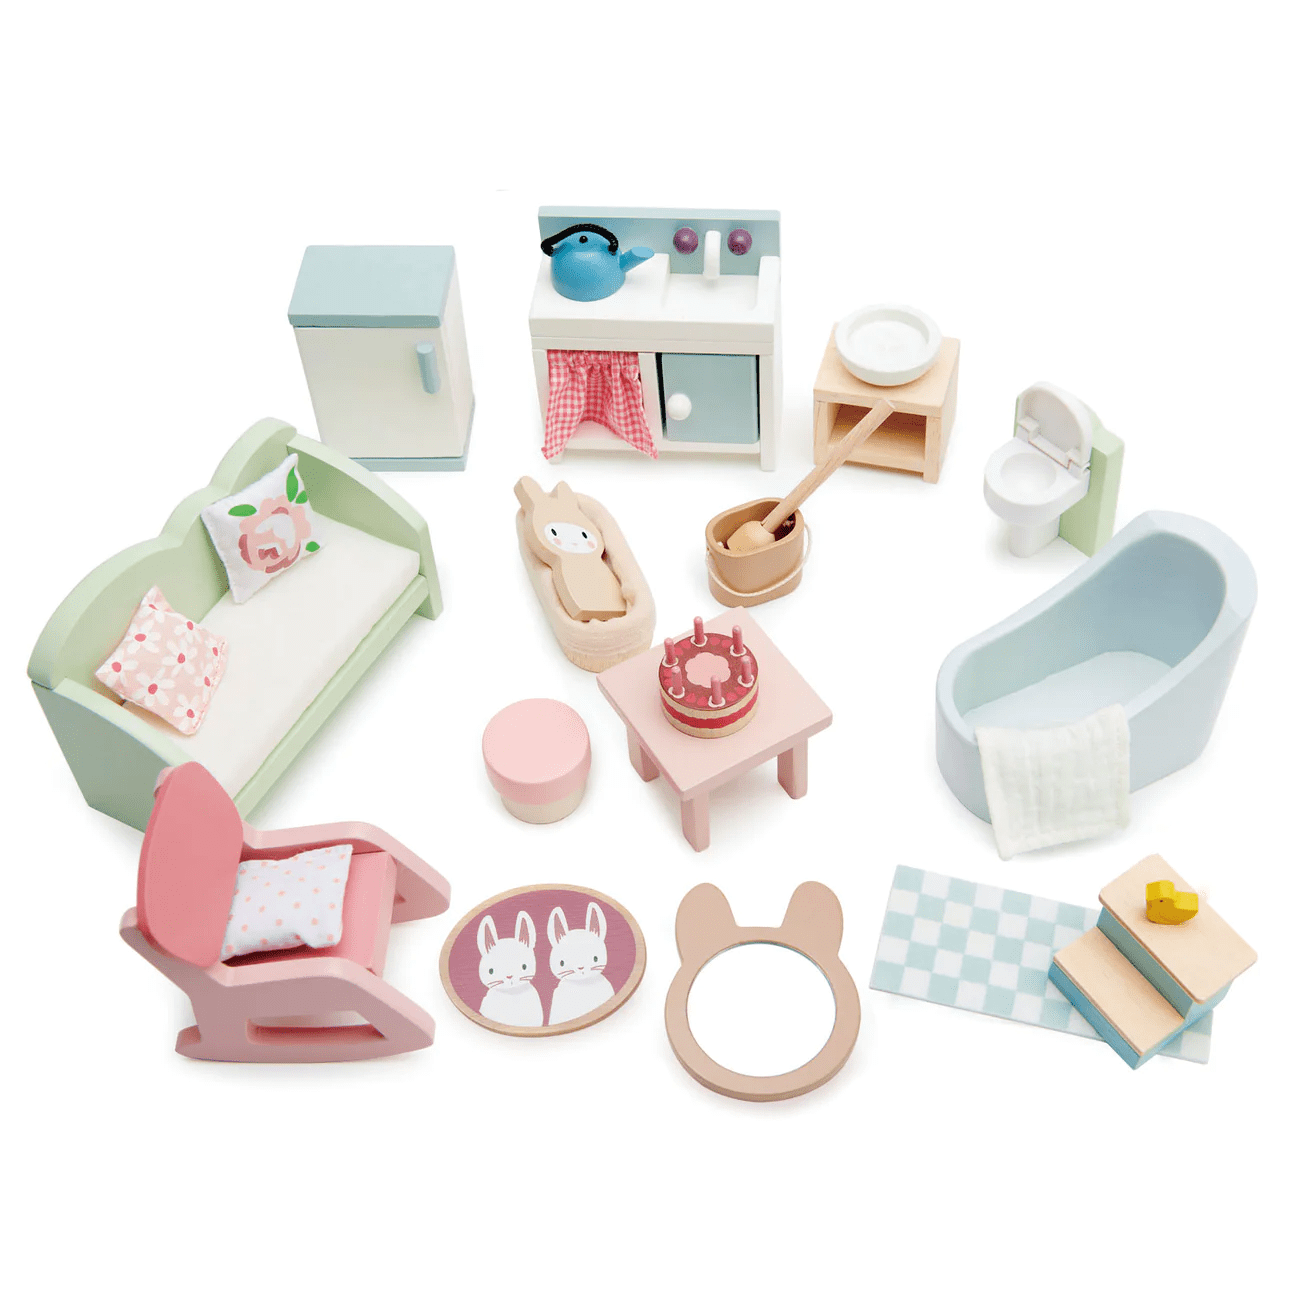 Countryside Furniture Set | Tender Leaf Toys | Iris Gifts & Décor